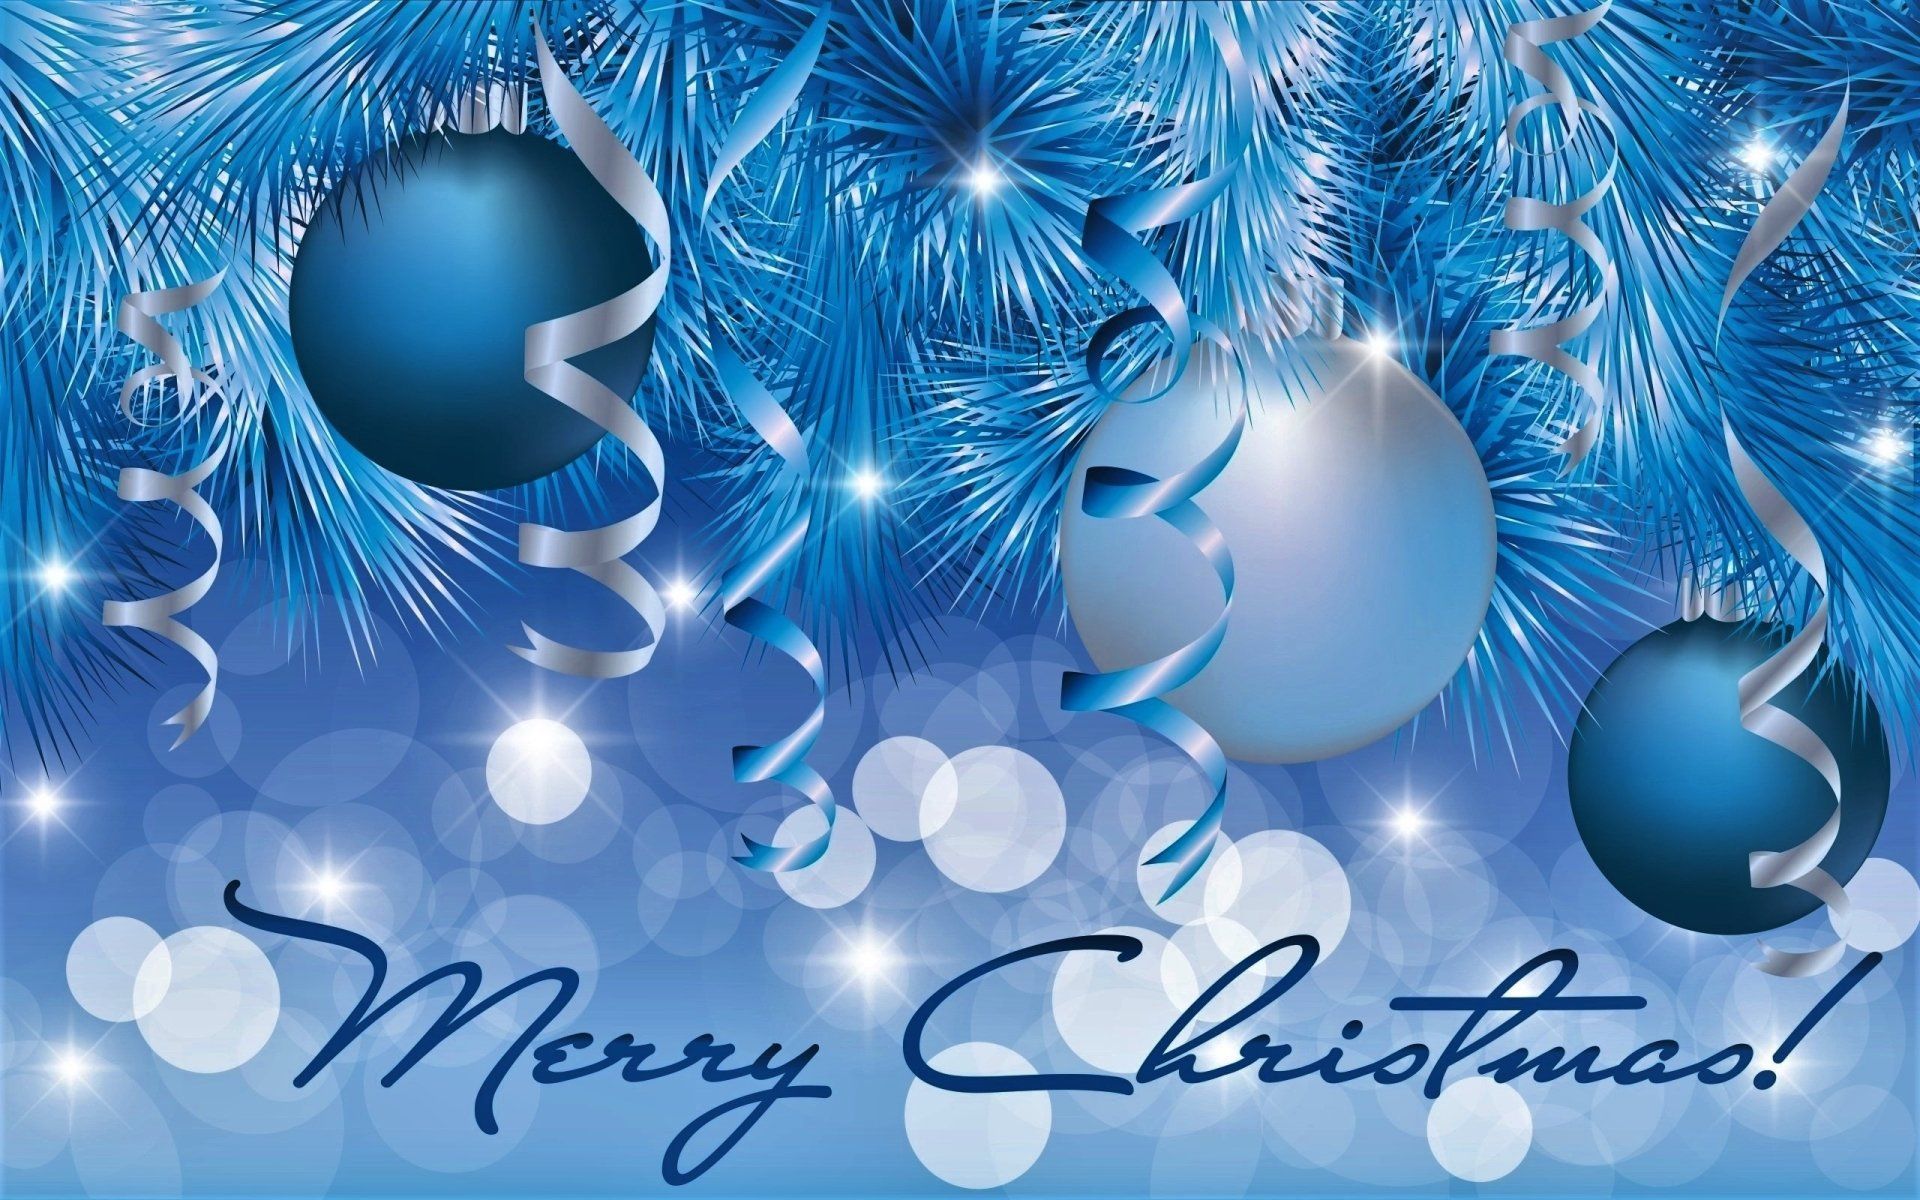 Holiday Christmas Christmas Ornaments Blue White Ribbon Merry Christmas Wall. Merry christmas wallpaper, Christmas facebook cover, Christmas wallpaper background